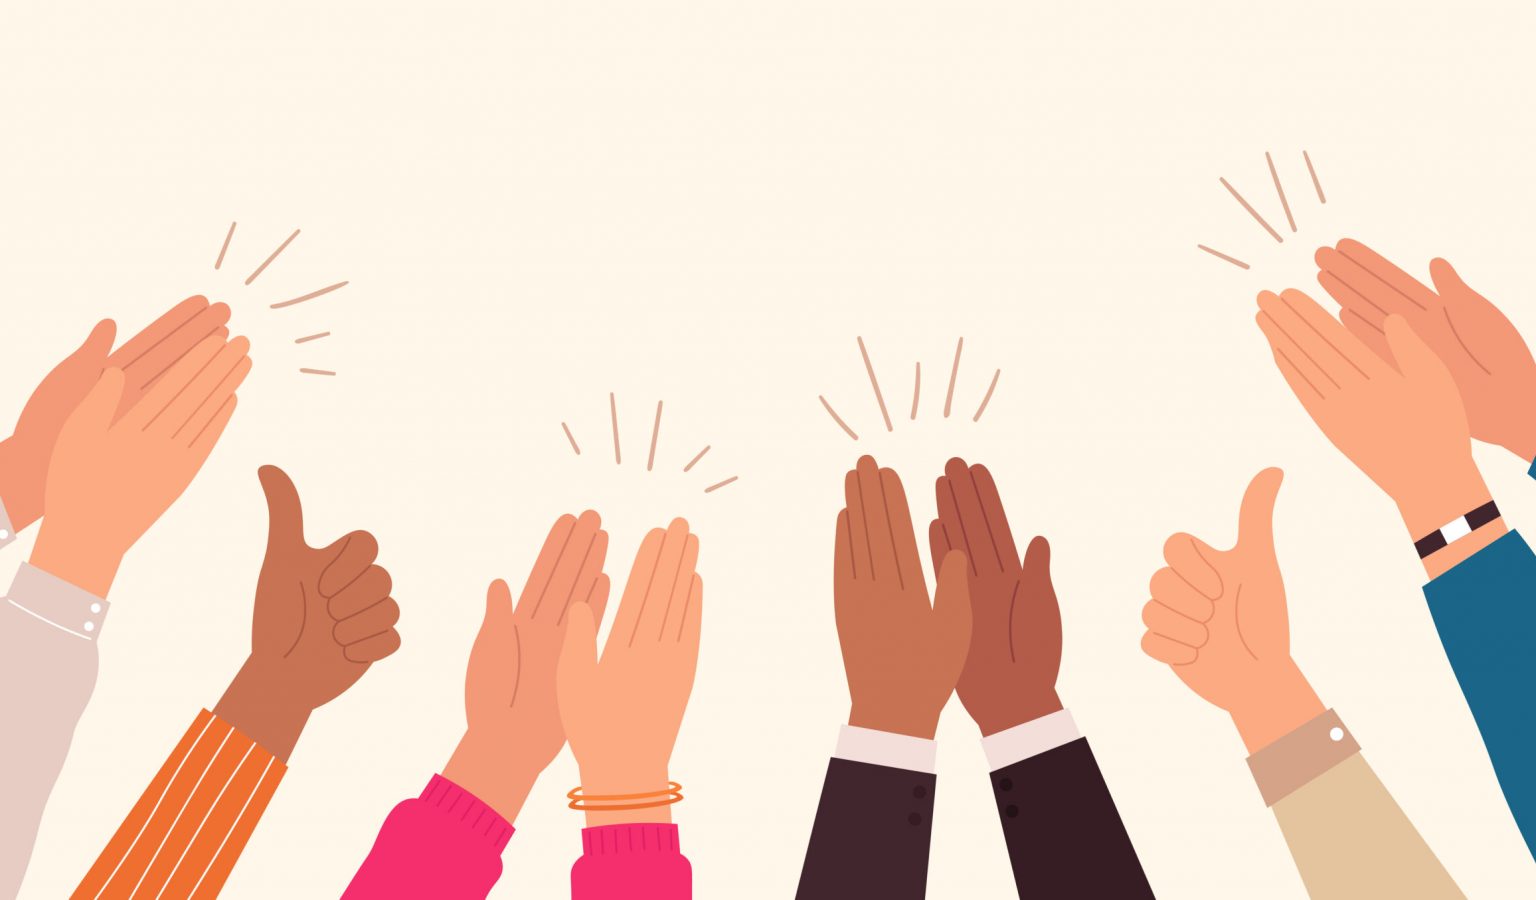 Human hands clapping. People crowd applaud to congratulate success job. Hand thumbs up. Business team cheering and ovation vector concept. Illustration support celebration, appreciation friendship